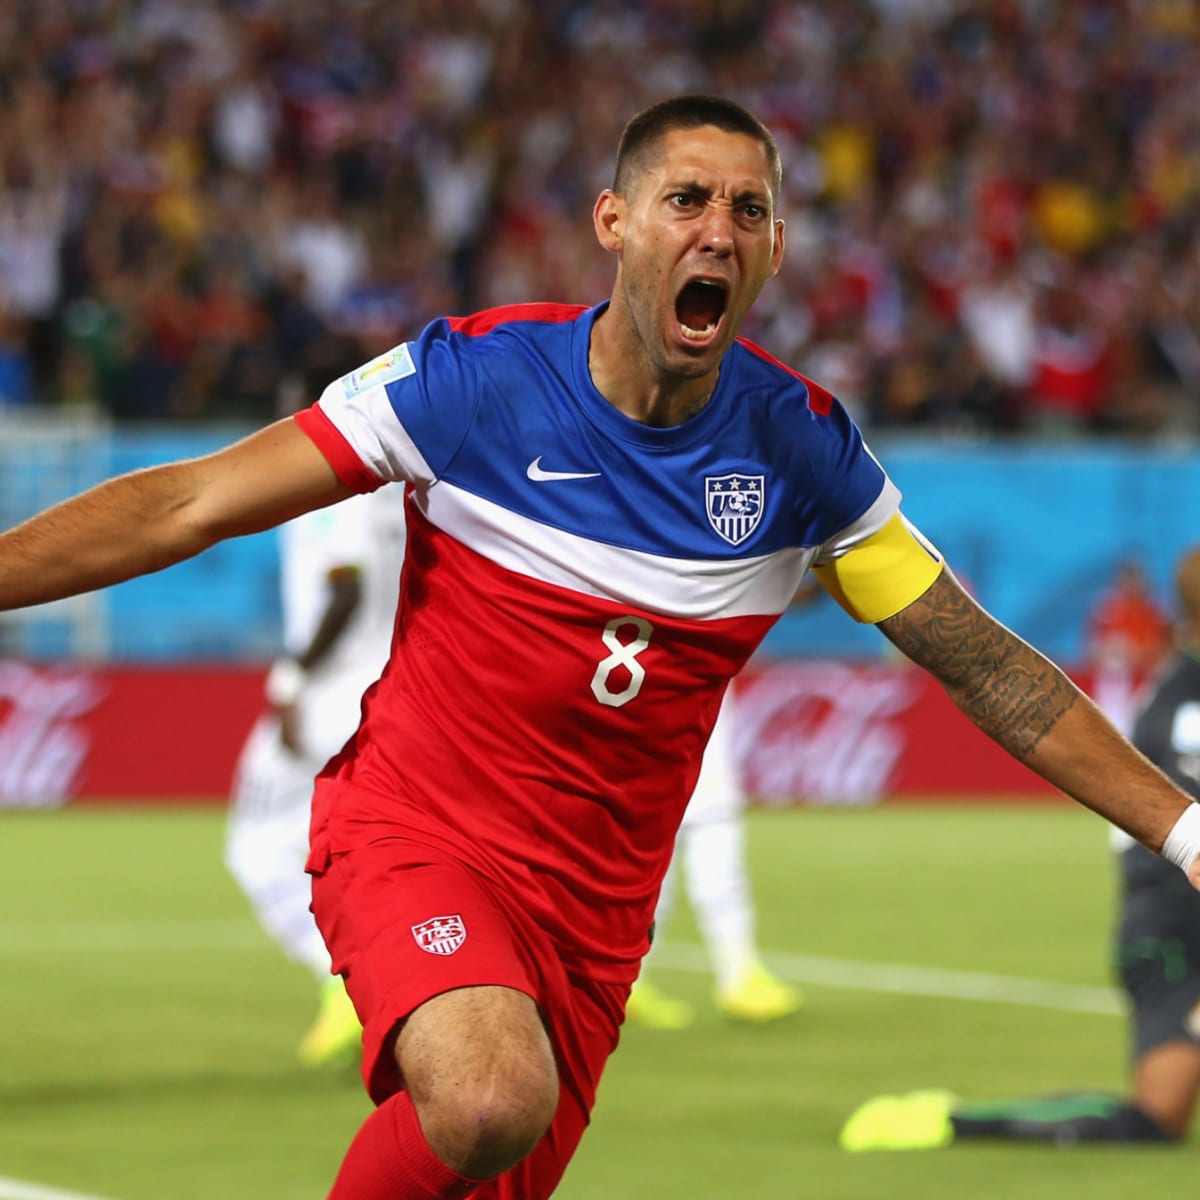 With fingers to the sky after scoring, Team USA's World Cup hero pays  tribute to his sister and friend who each died tragically: Clint Dempsey's  secret heartbreak revealed